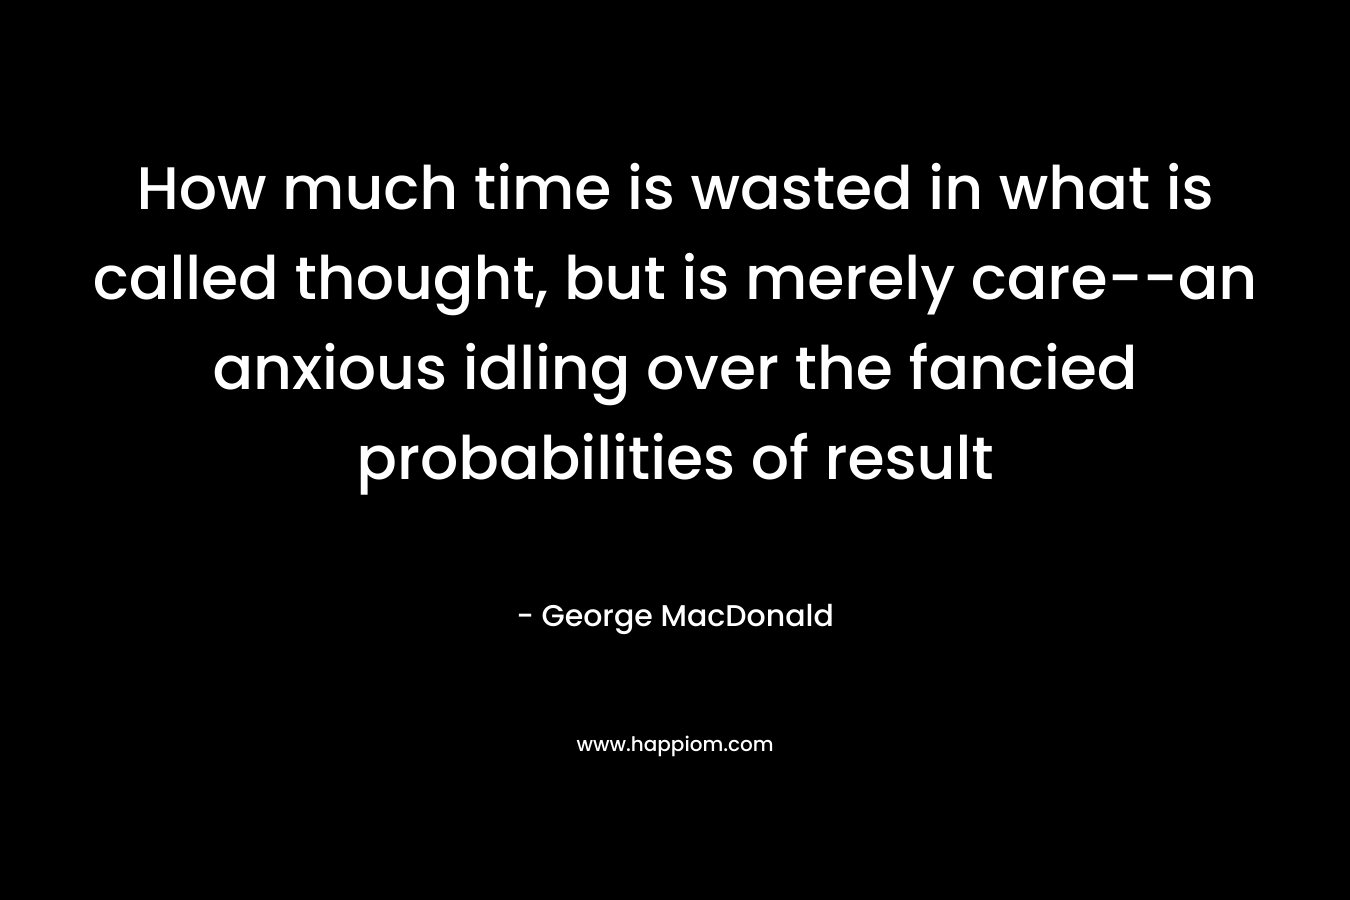 How much time is wasted in what is called thought, but is merely care--an anxious idling over the fancied probabilities of result